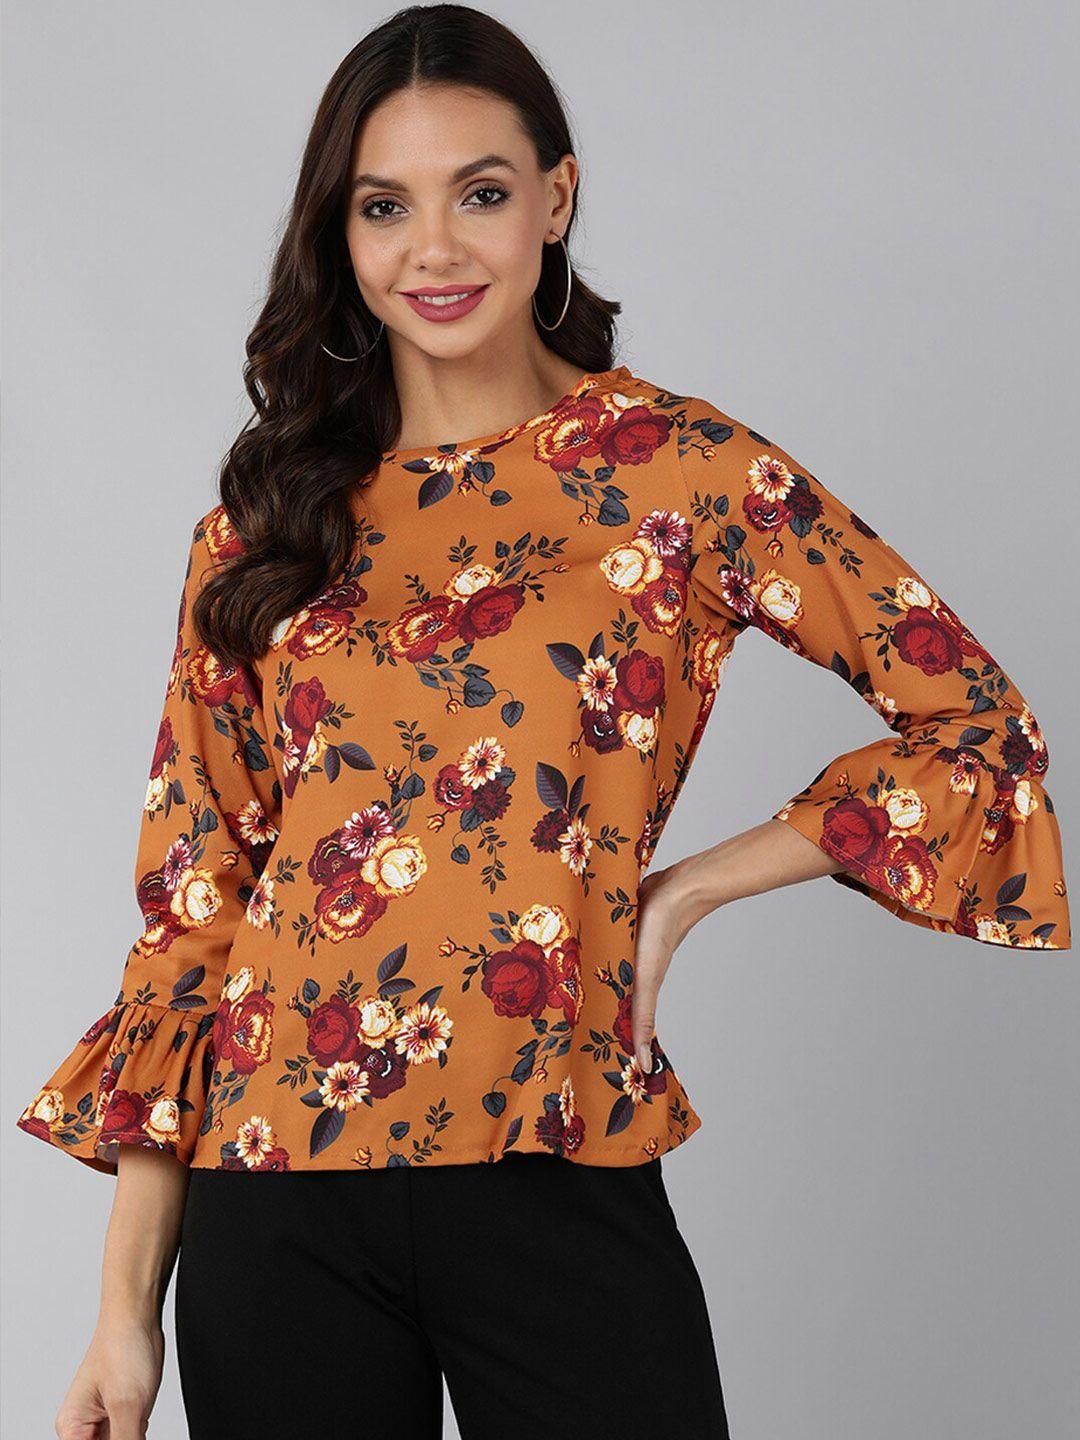 ahika mustard yellow & apricot buff floral print georgette top